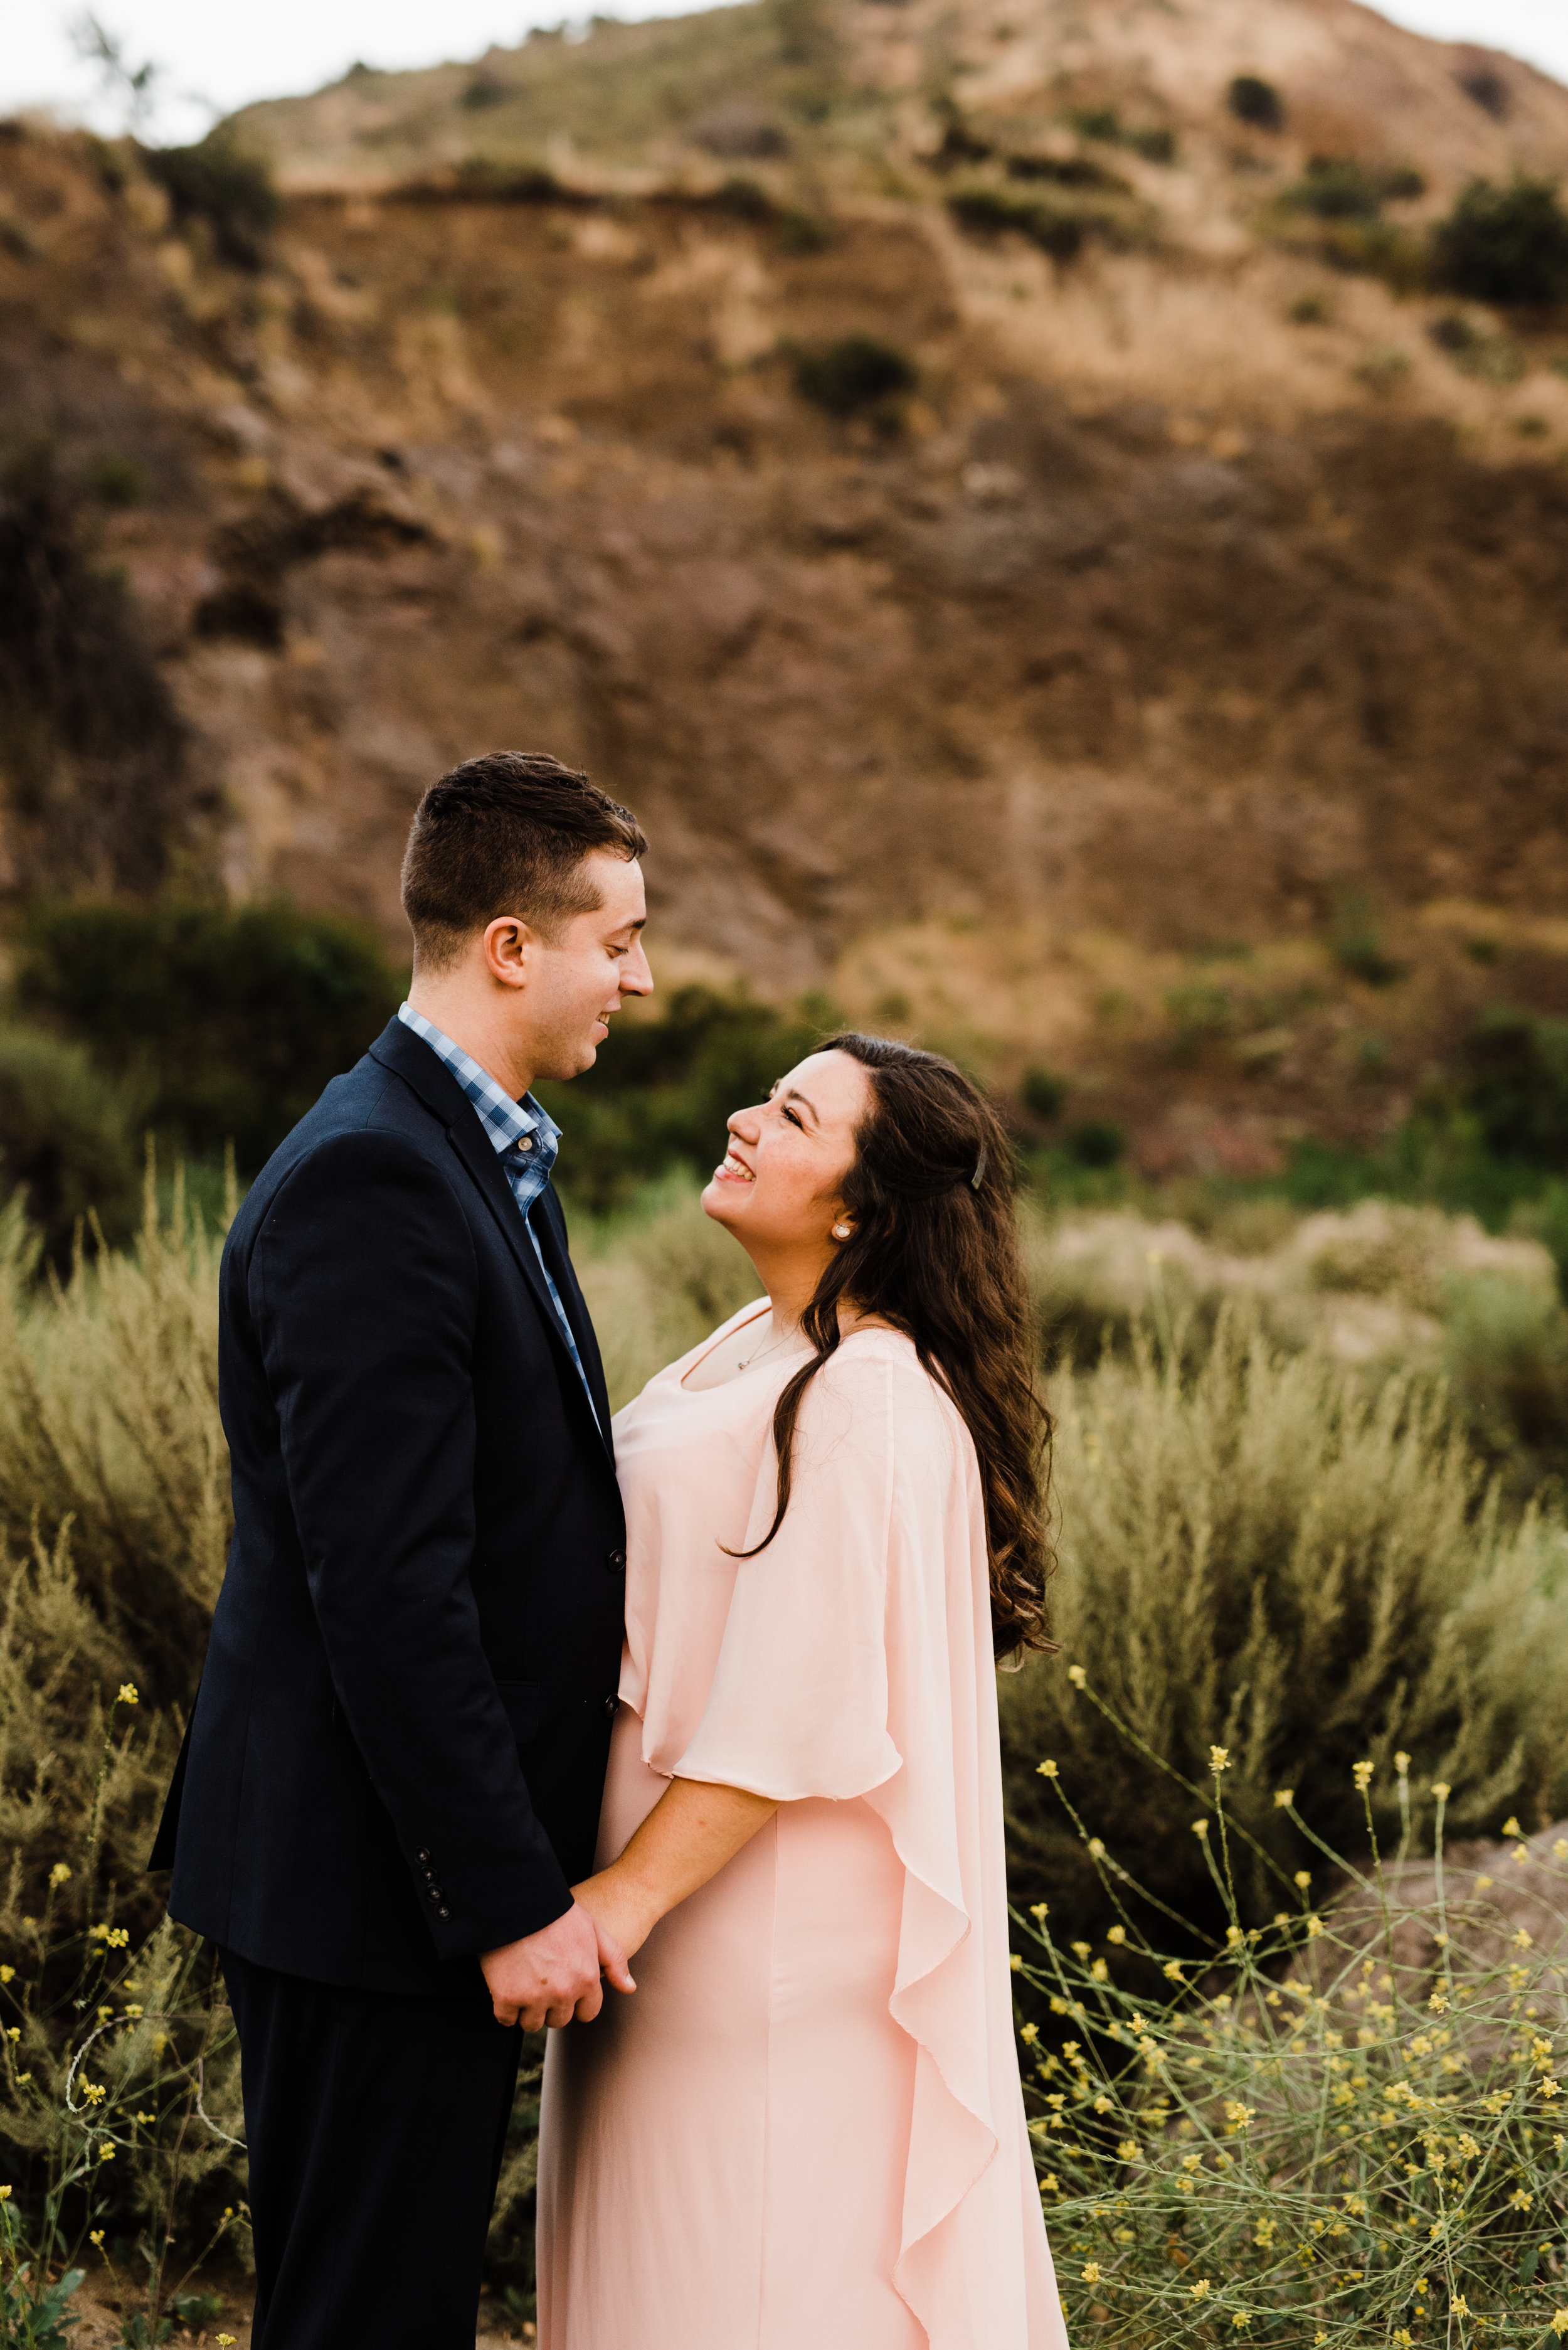 Fields, Wildflowers, and Trails - this couple explored it all at their adventurous LA engagement session